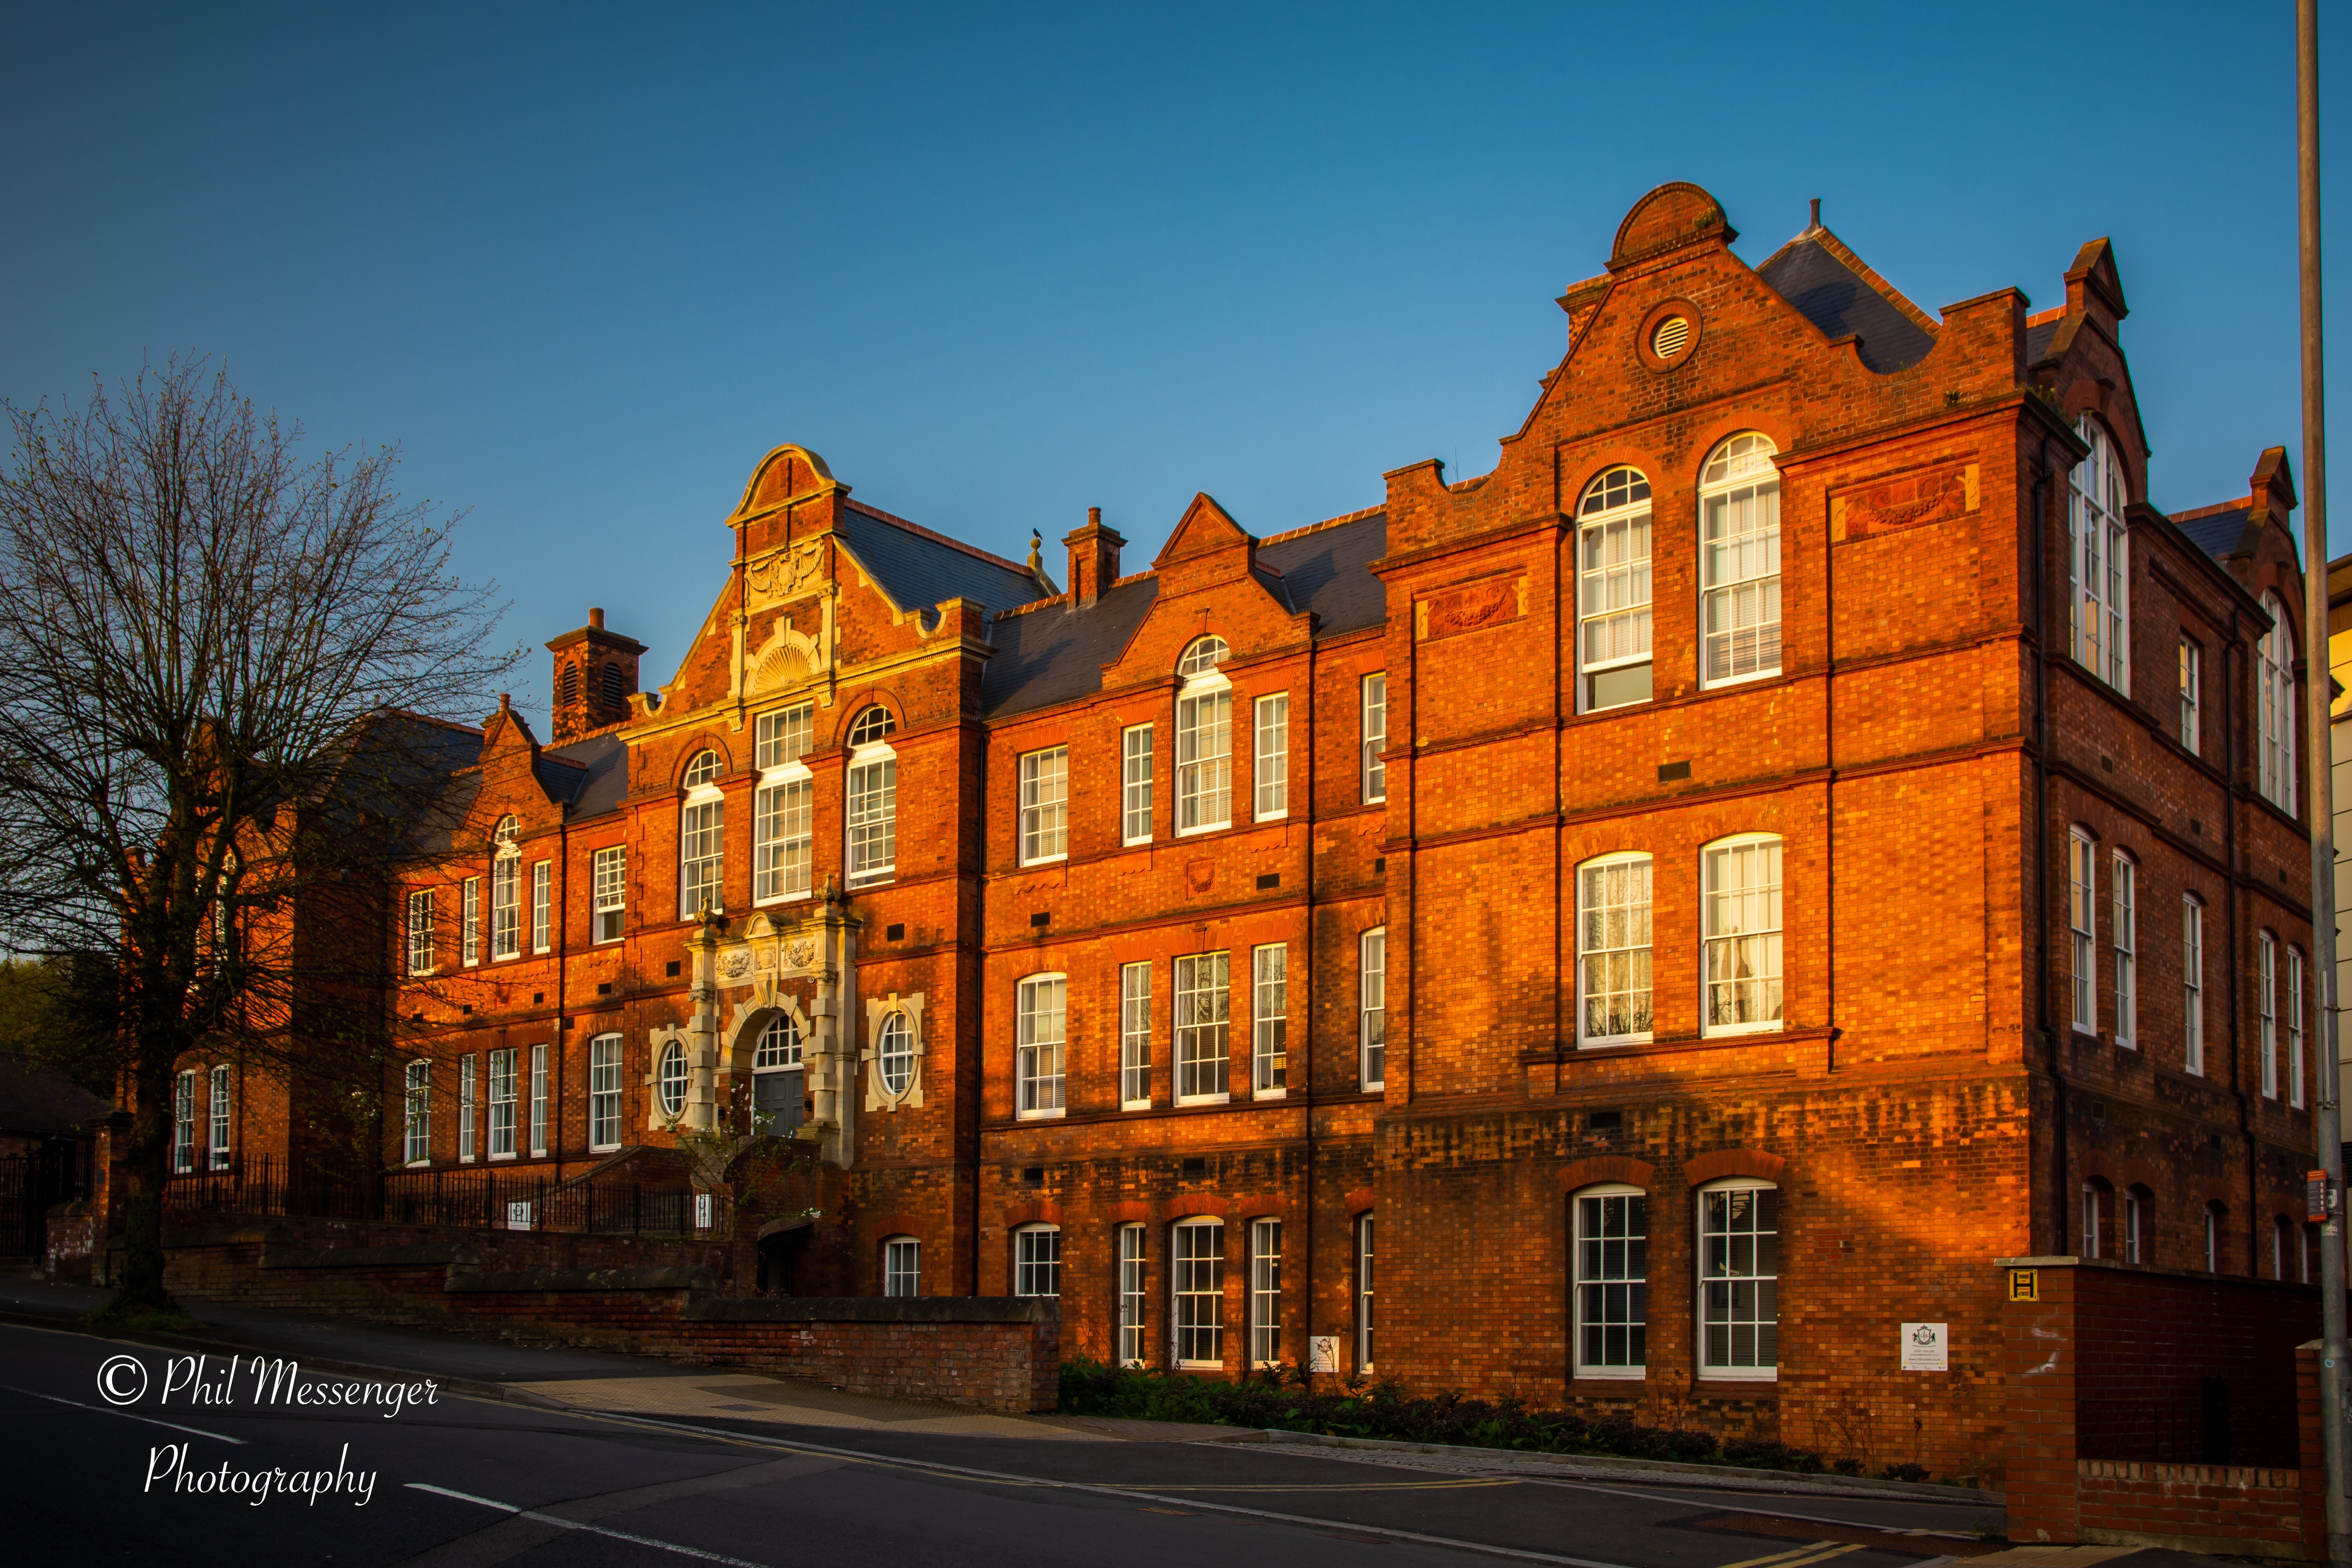 Victorian nineteenth century Technical College building, Victoria Road, Swindon veiled in early morning sunshine.